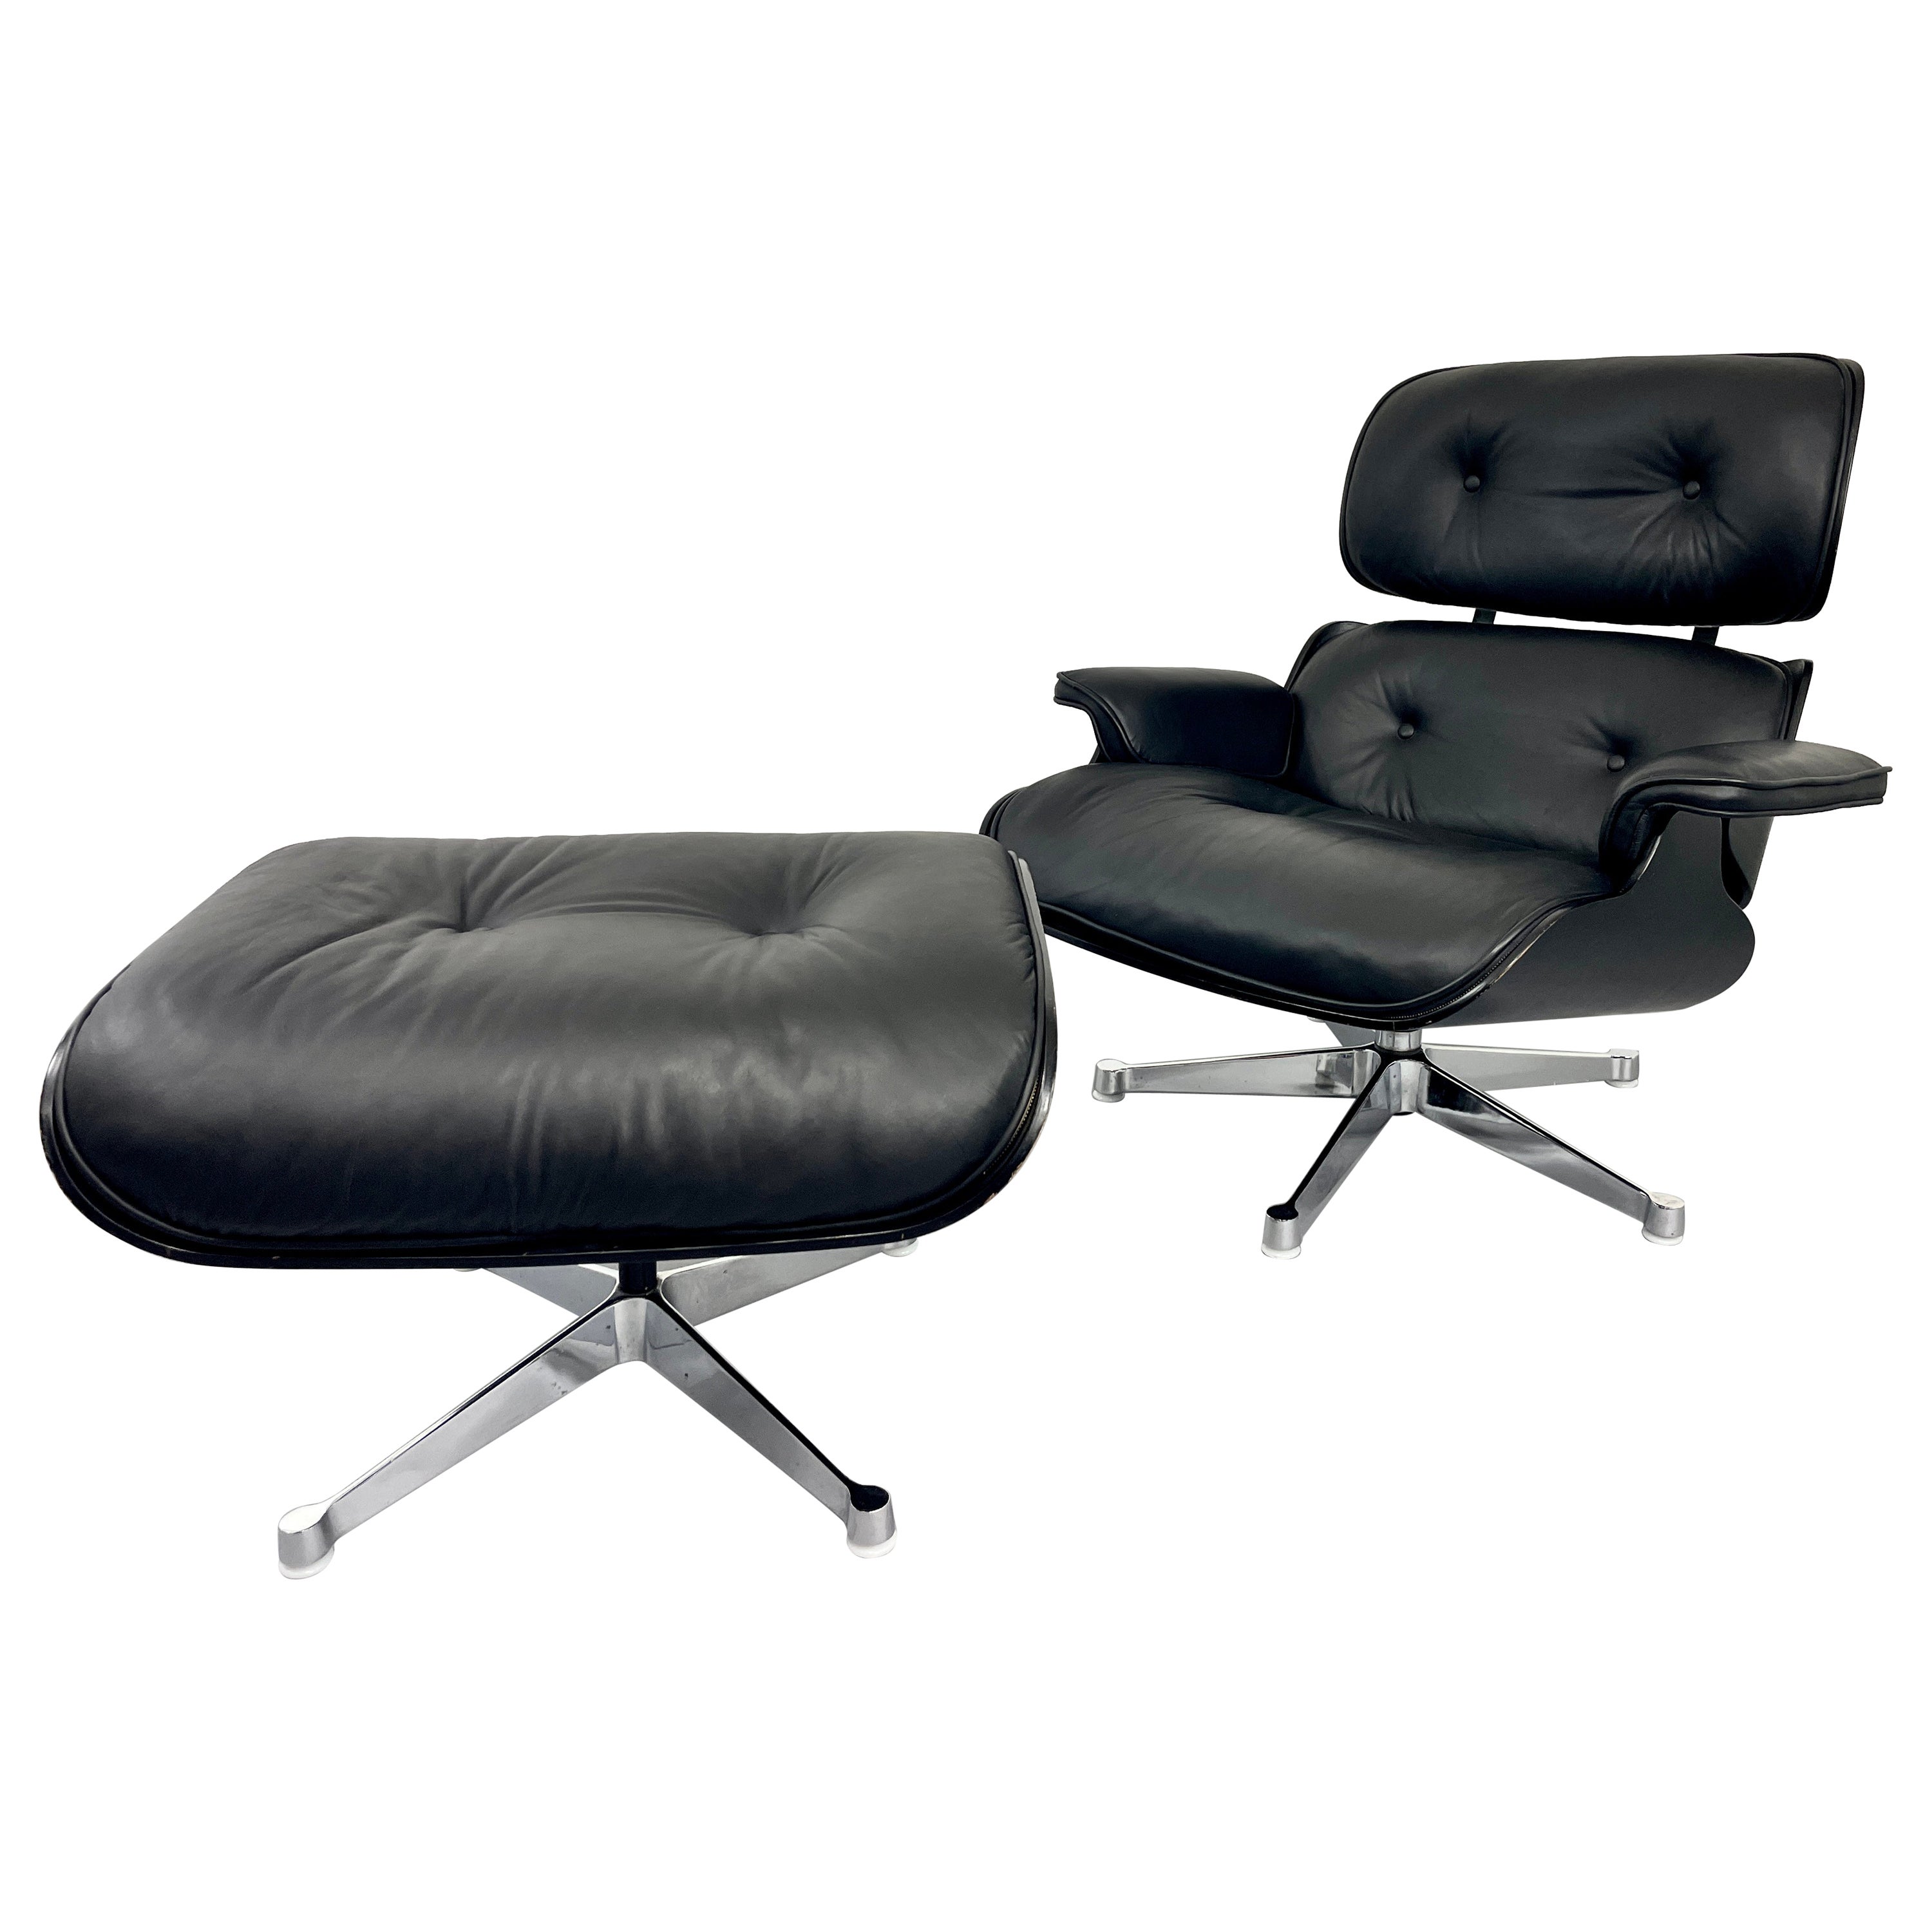 Black vintage Herman Miller Lounge Chair with Ottoman, designed by Eames 